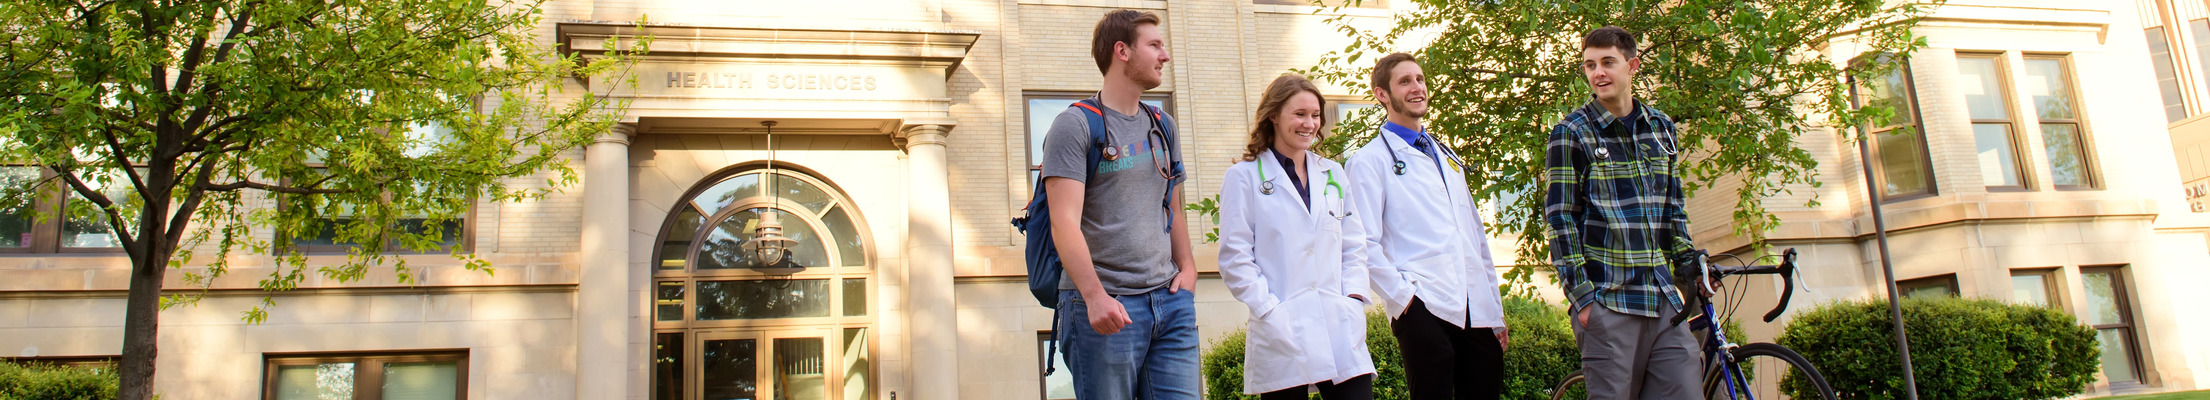 Students in a group walking outside the health sciences building